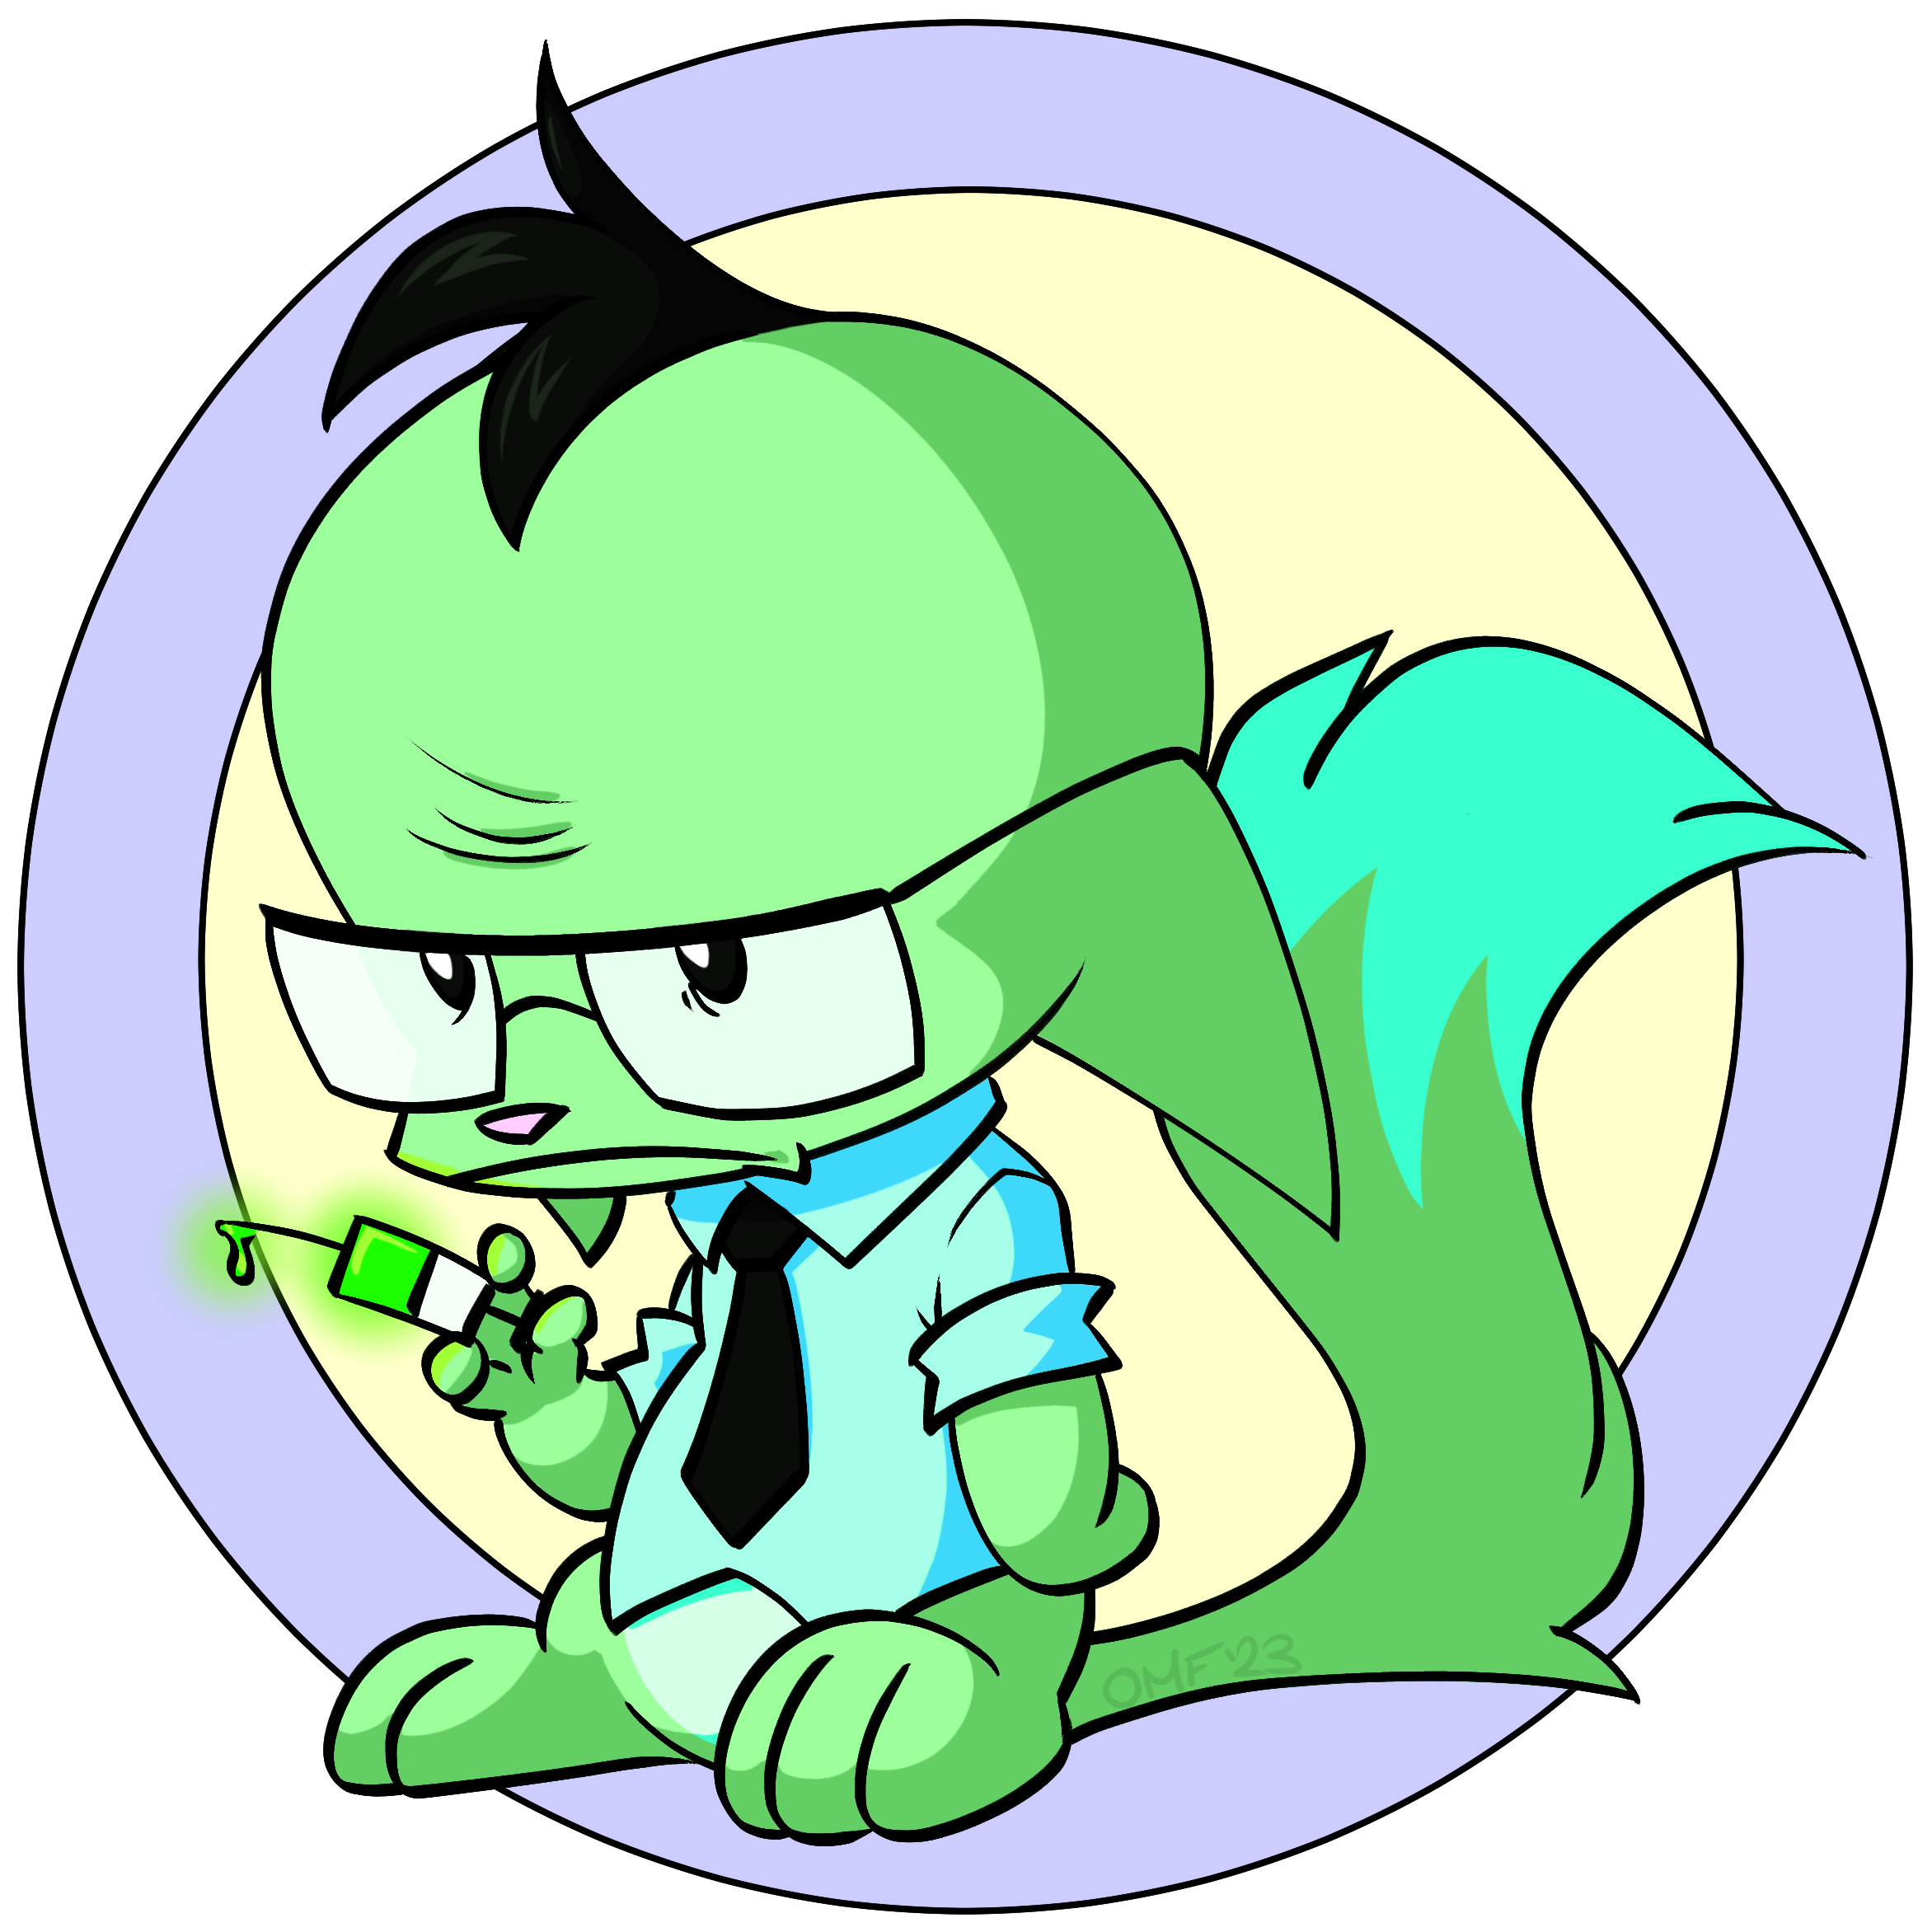 An original overlay for a neopet. The pet has green fur, a long tail, and pointy down-turned ears. It is wearing a pair of square glasses, a button-down shirt, and a tie, and is holding a syringe full of glowing green liquid, like Herbert West from Re-Animator. There is a little tuft of black fur on its head and it is frowning to the left of the camera.